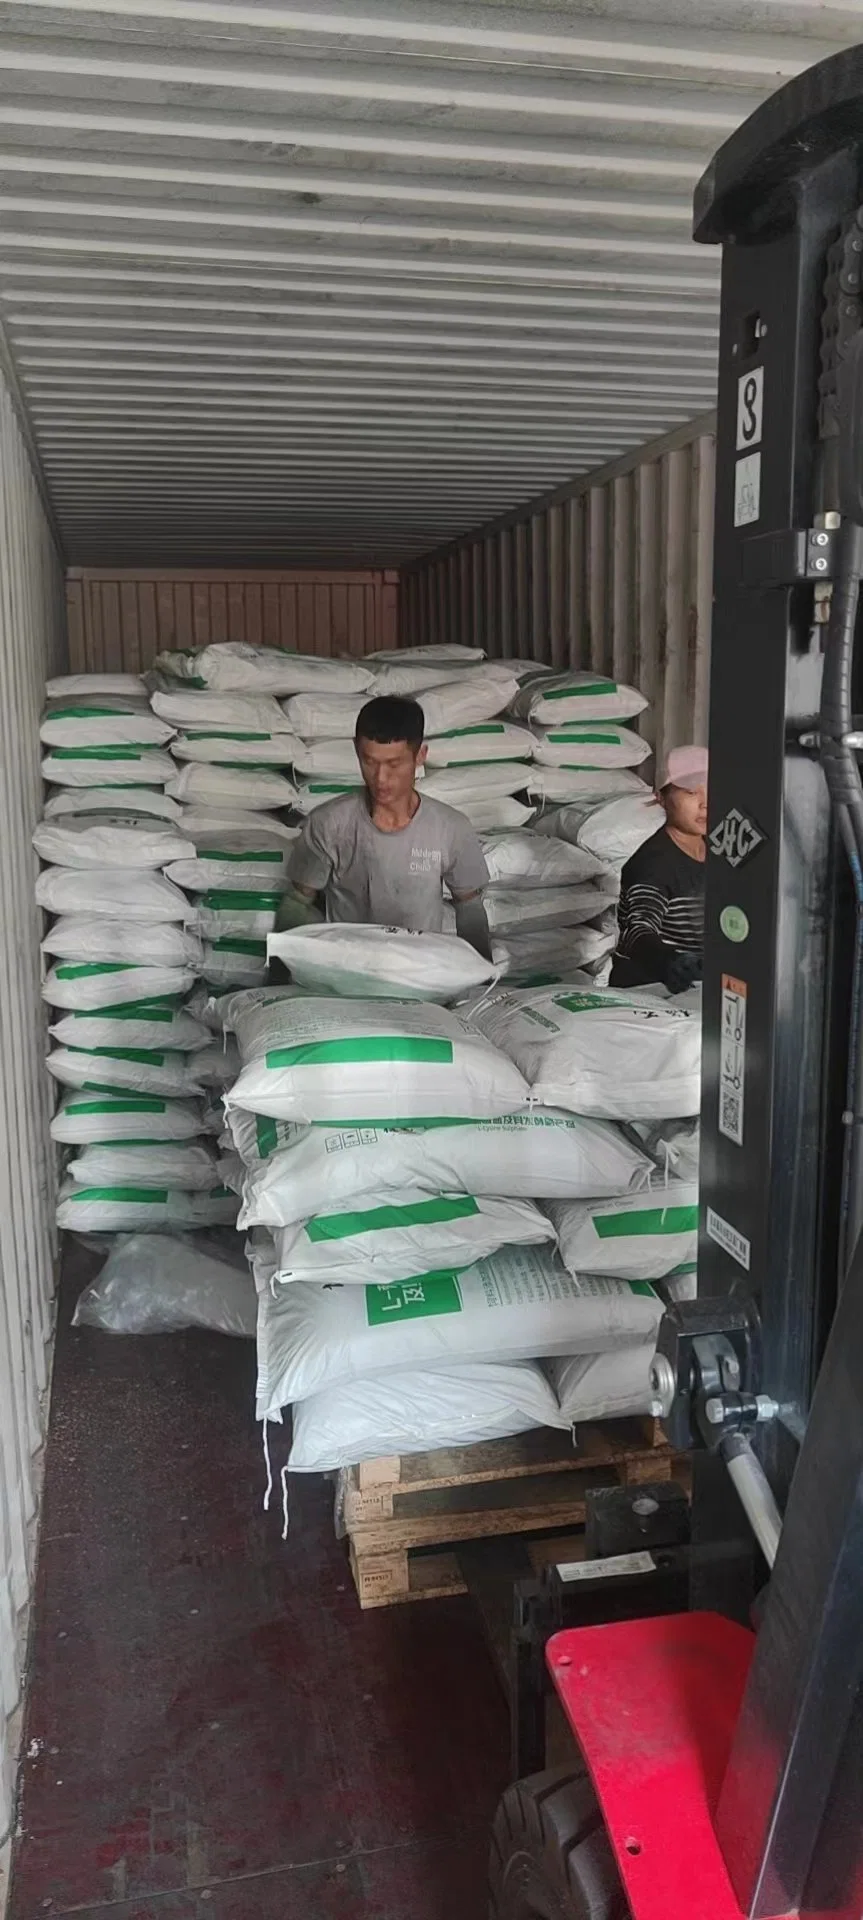 Poultry Feed L-Lysine HCl Feed Grade CAS No. 657-27-2